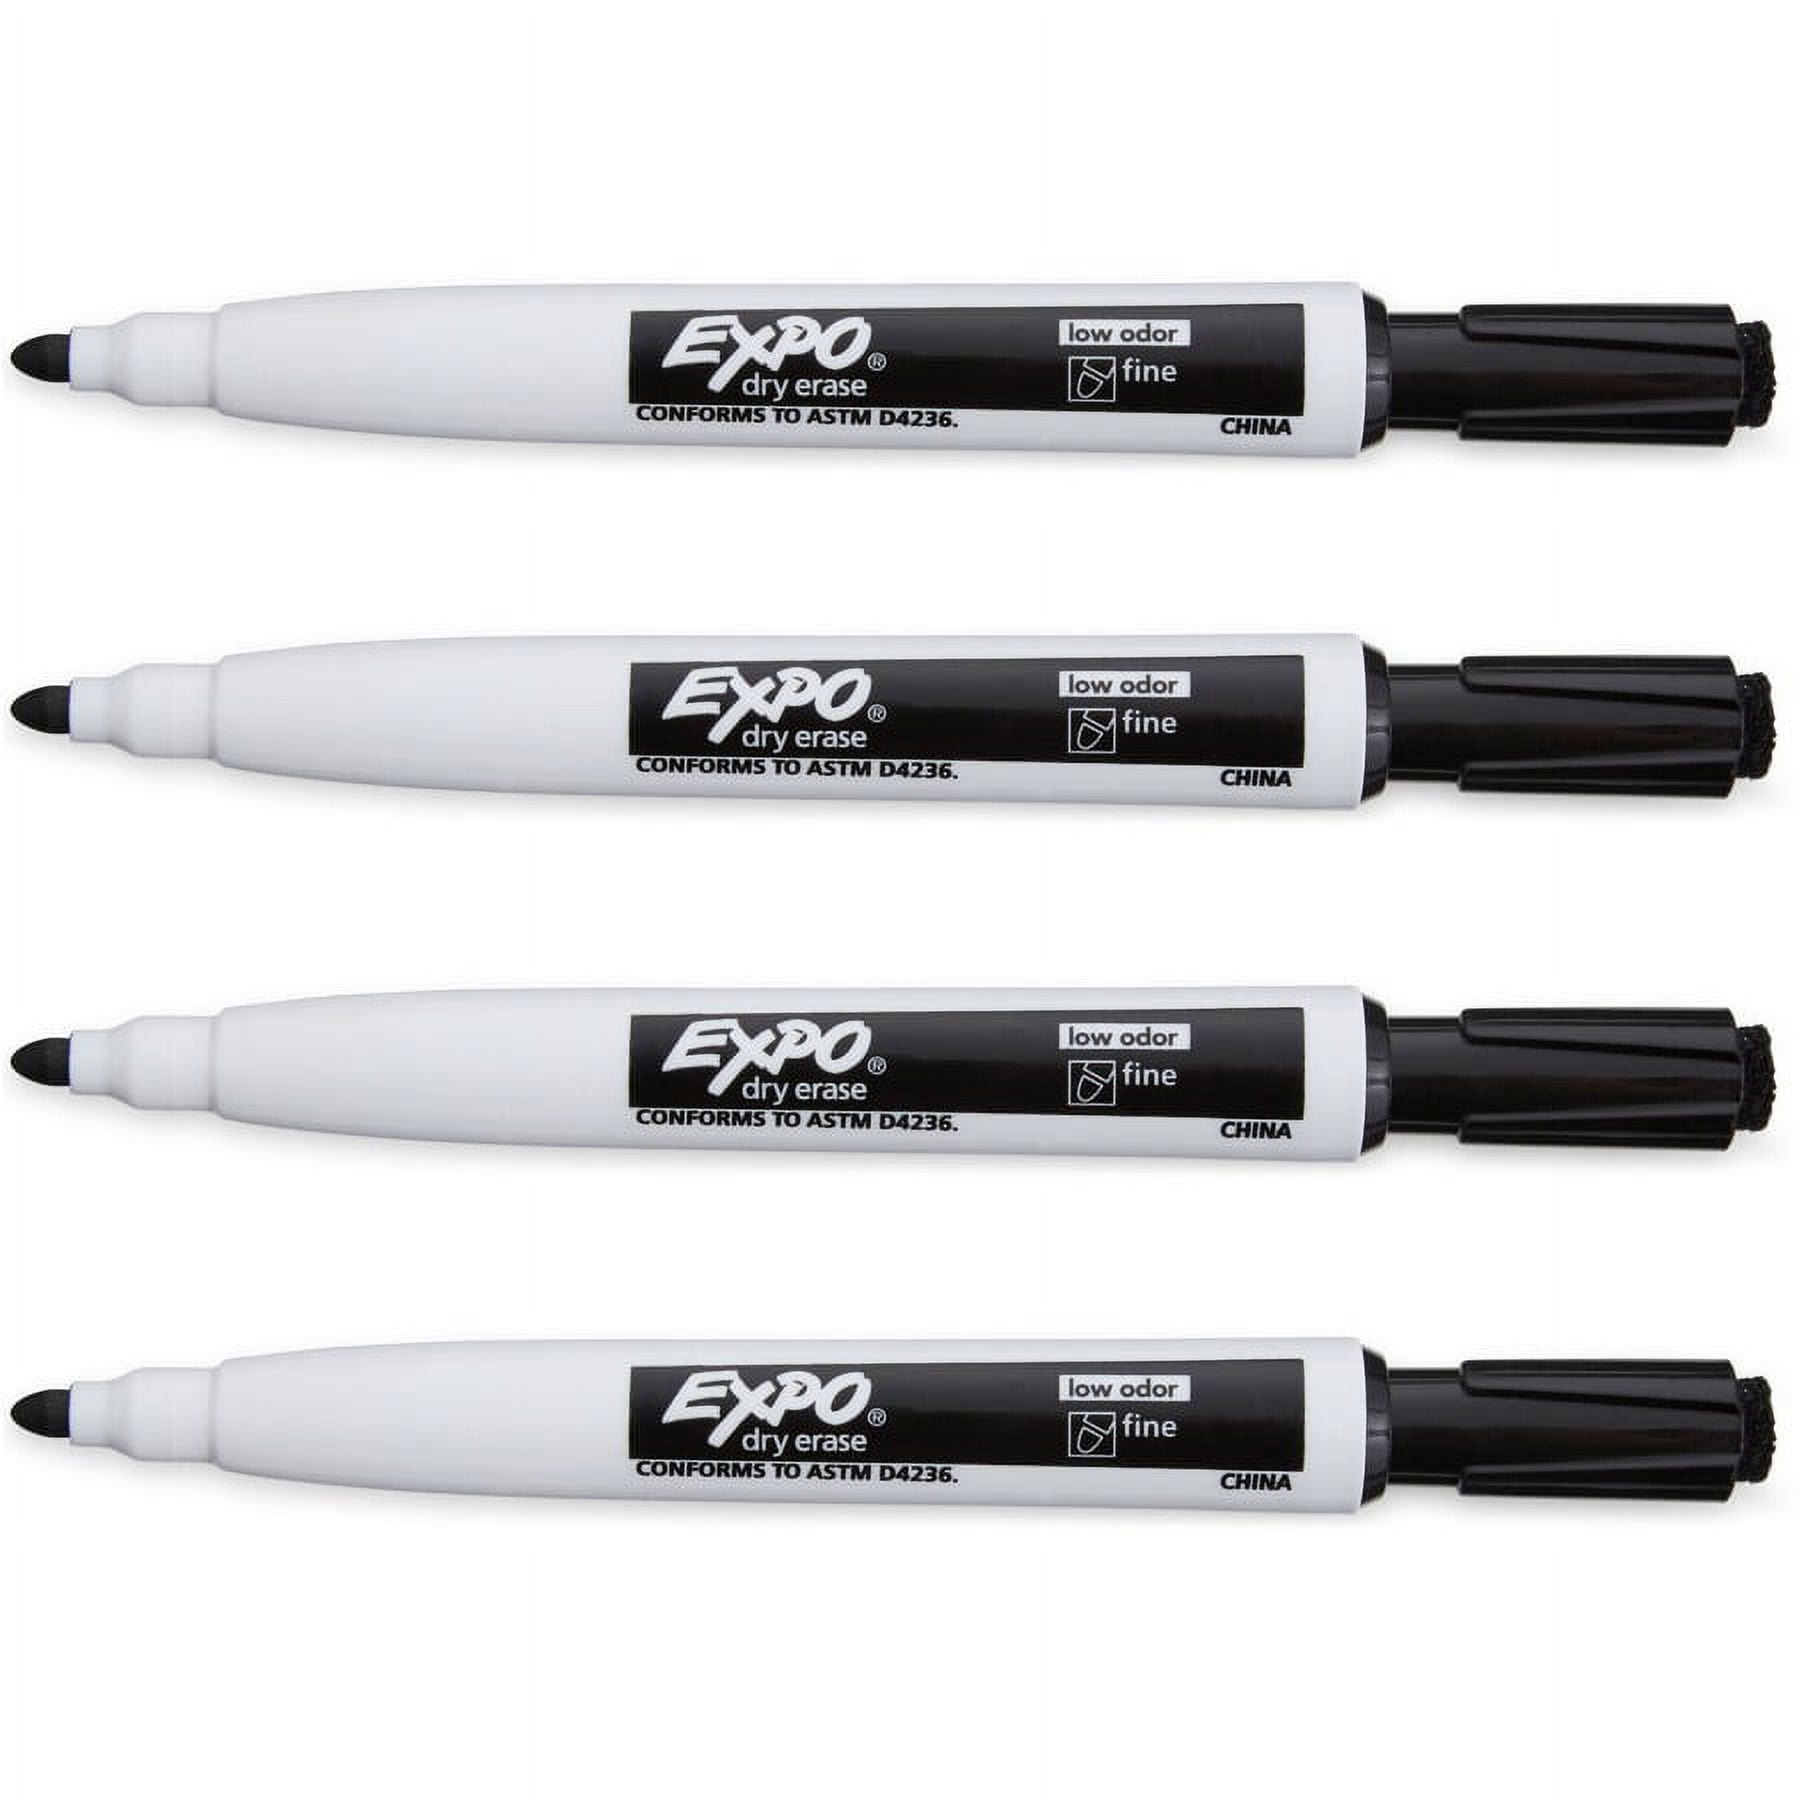 Dry Erase Markers - New 5 Pack - Magnetic Whiteboard Markers with Attached Erasers - Low Odor, Black